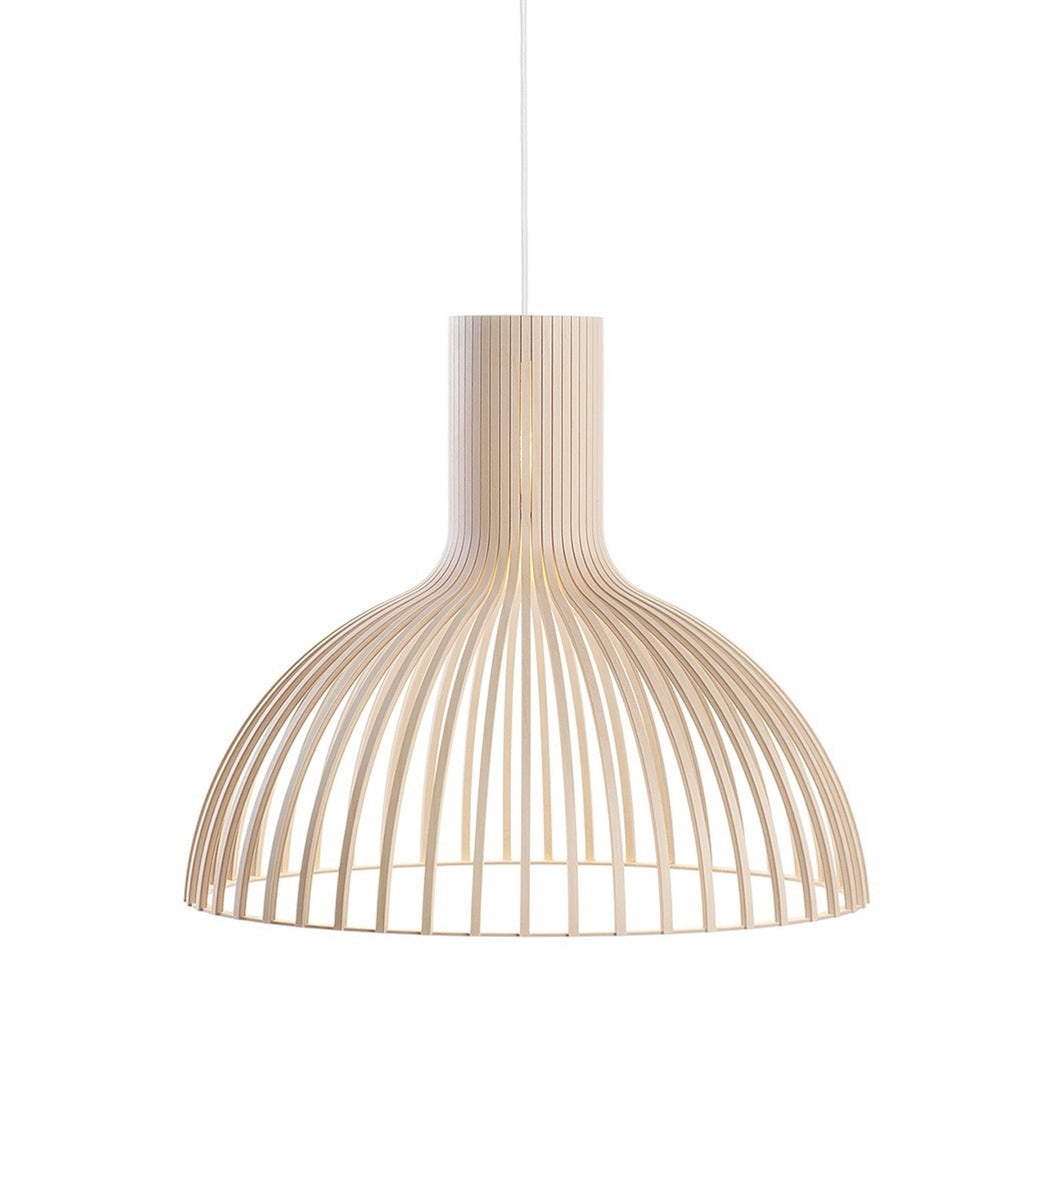 Victo 4250 Natural Birch wooden pendant Secto Design handmade contemporary lighting sustainable lights nordic Seppo Koho quality high end